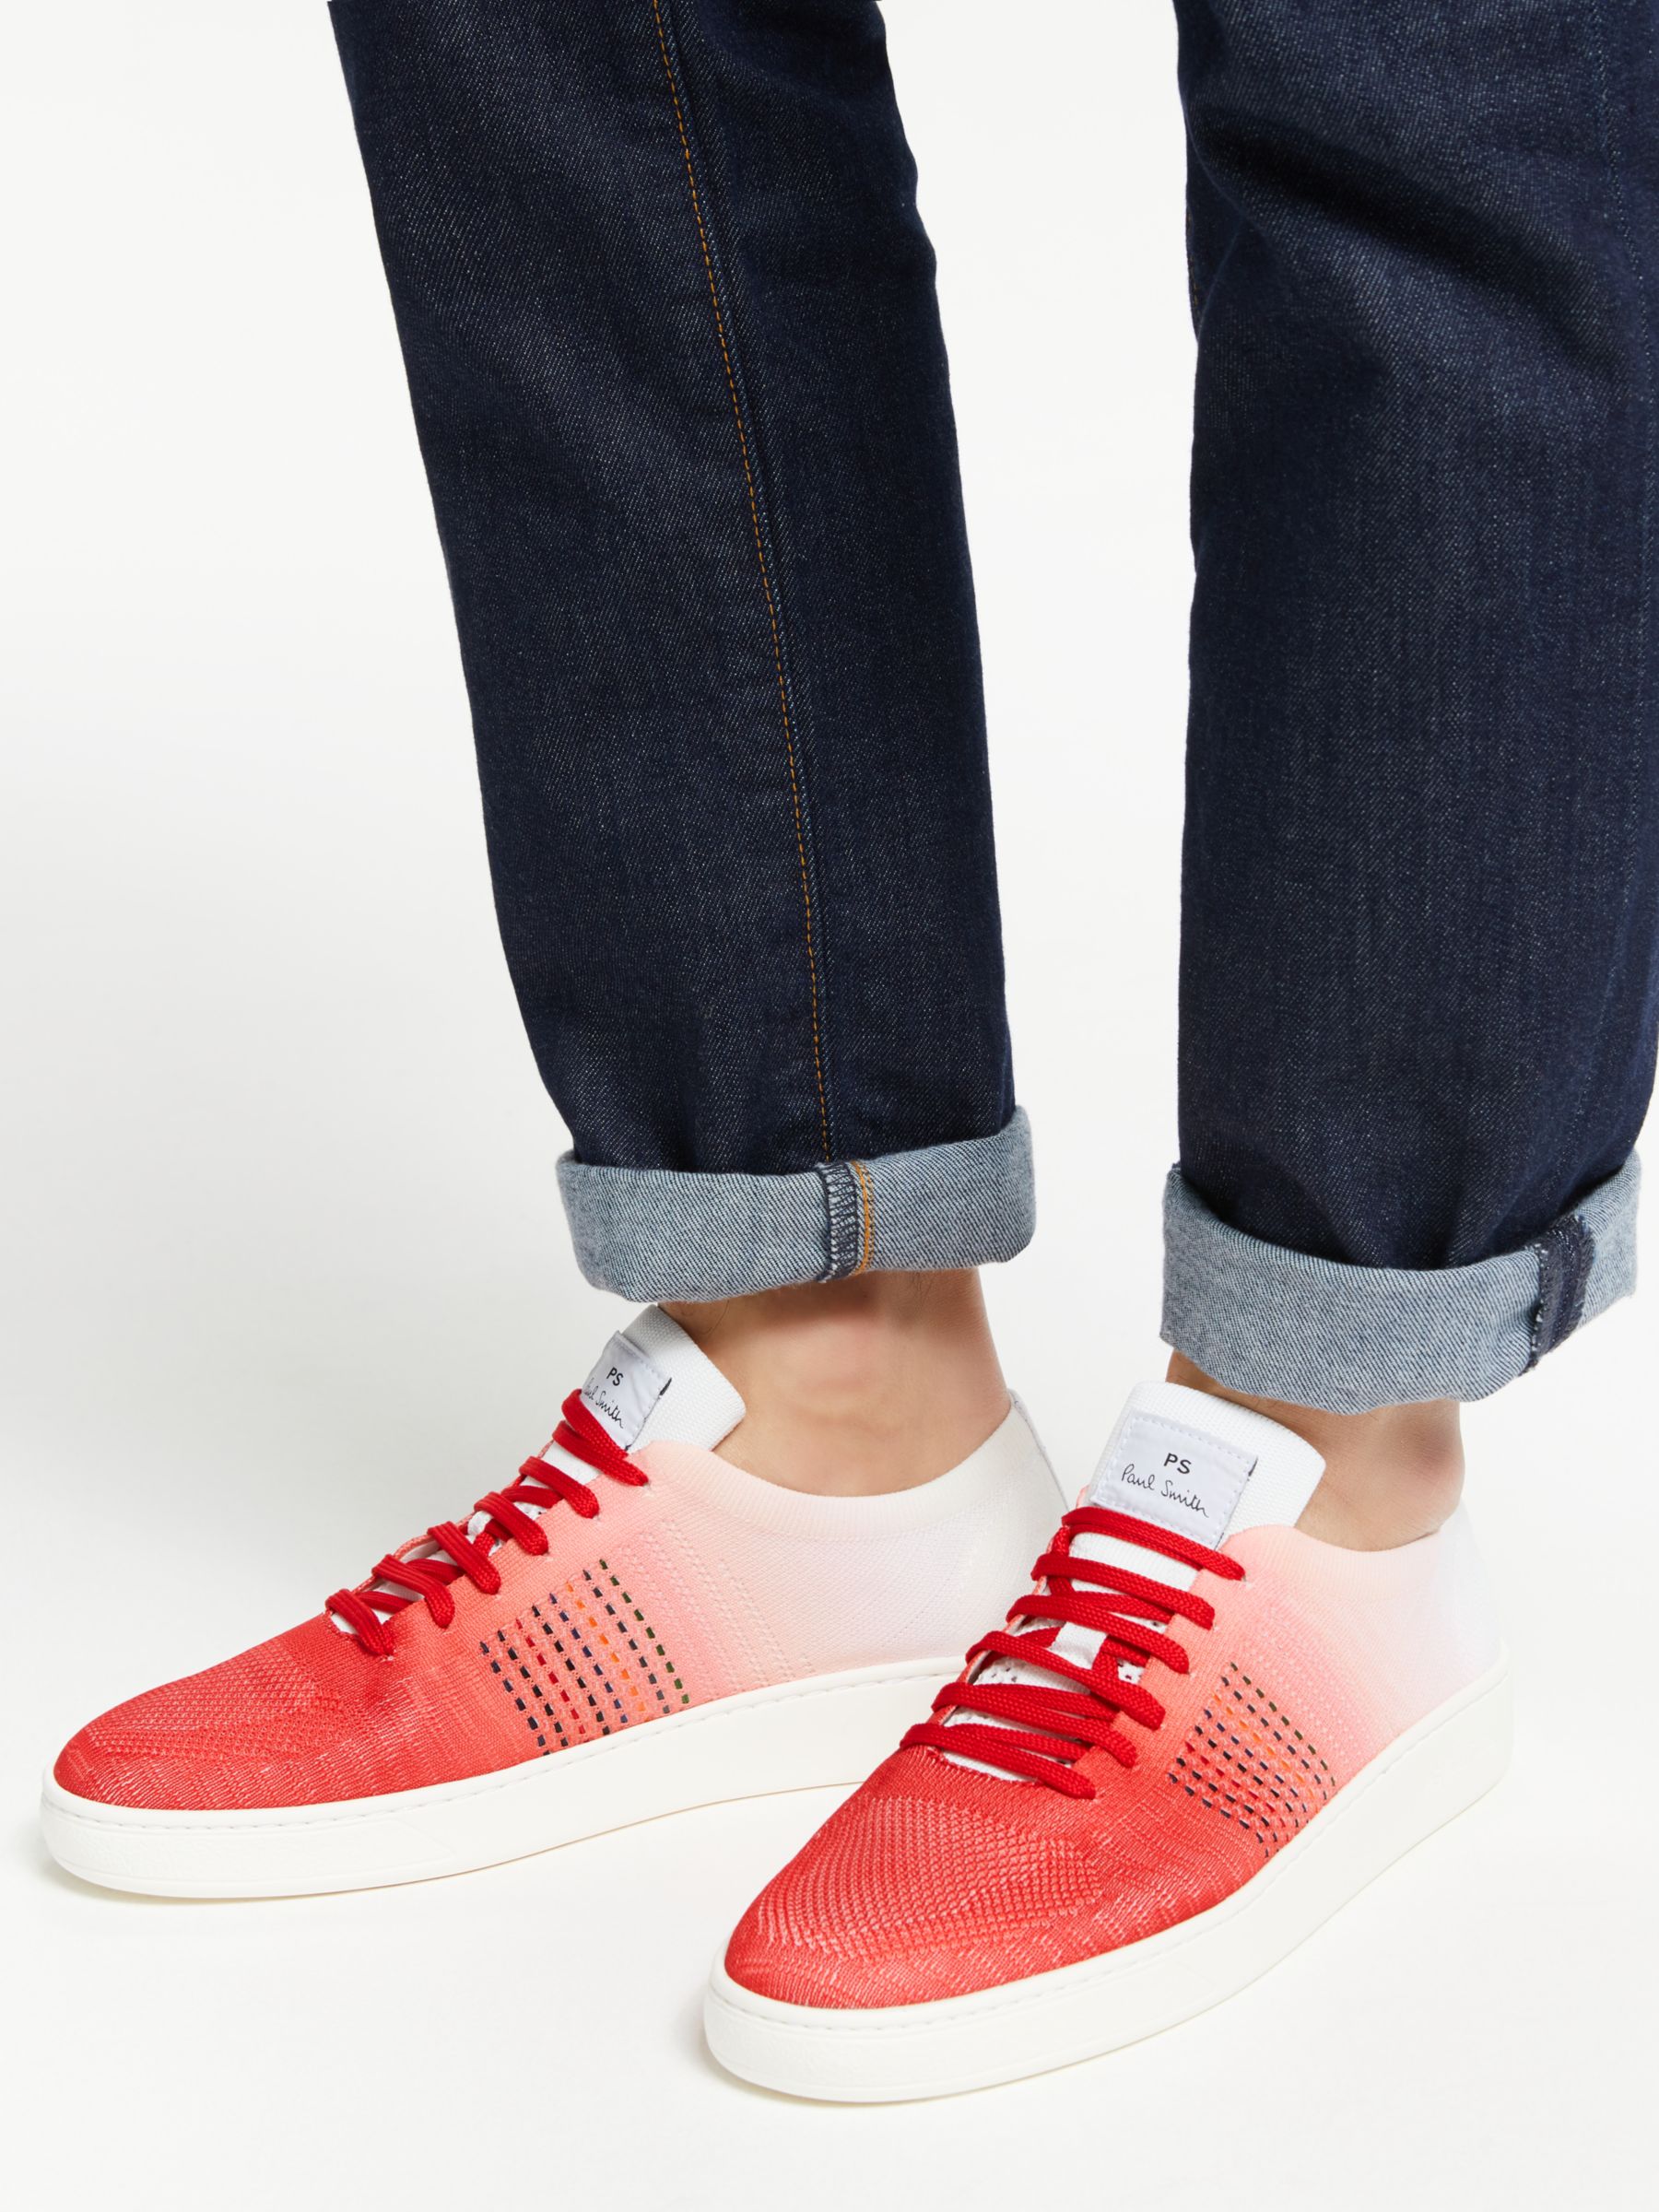 paul smith red trainers